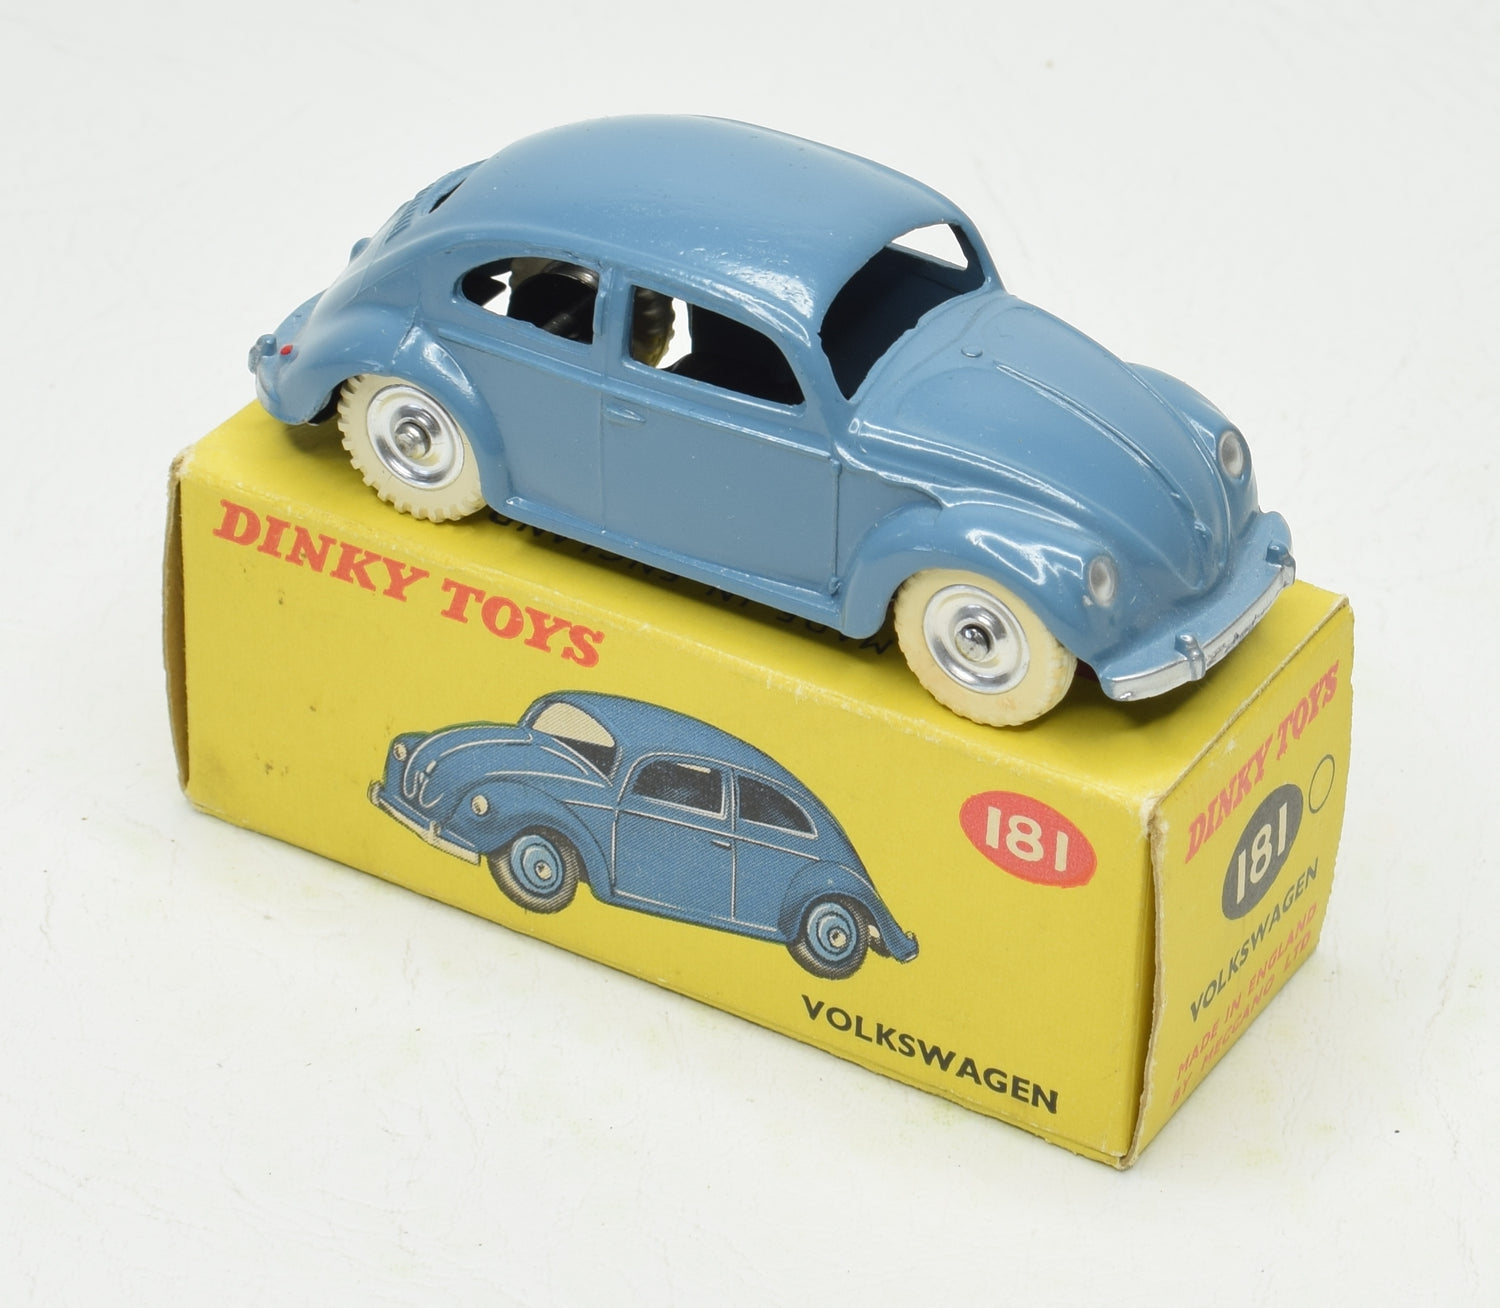 Dinky toy 181 Virtually Mint/Boxed